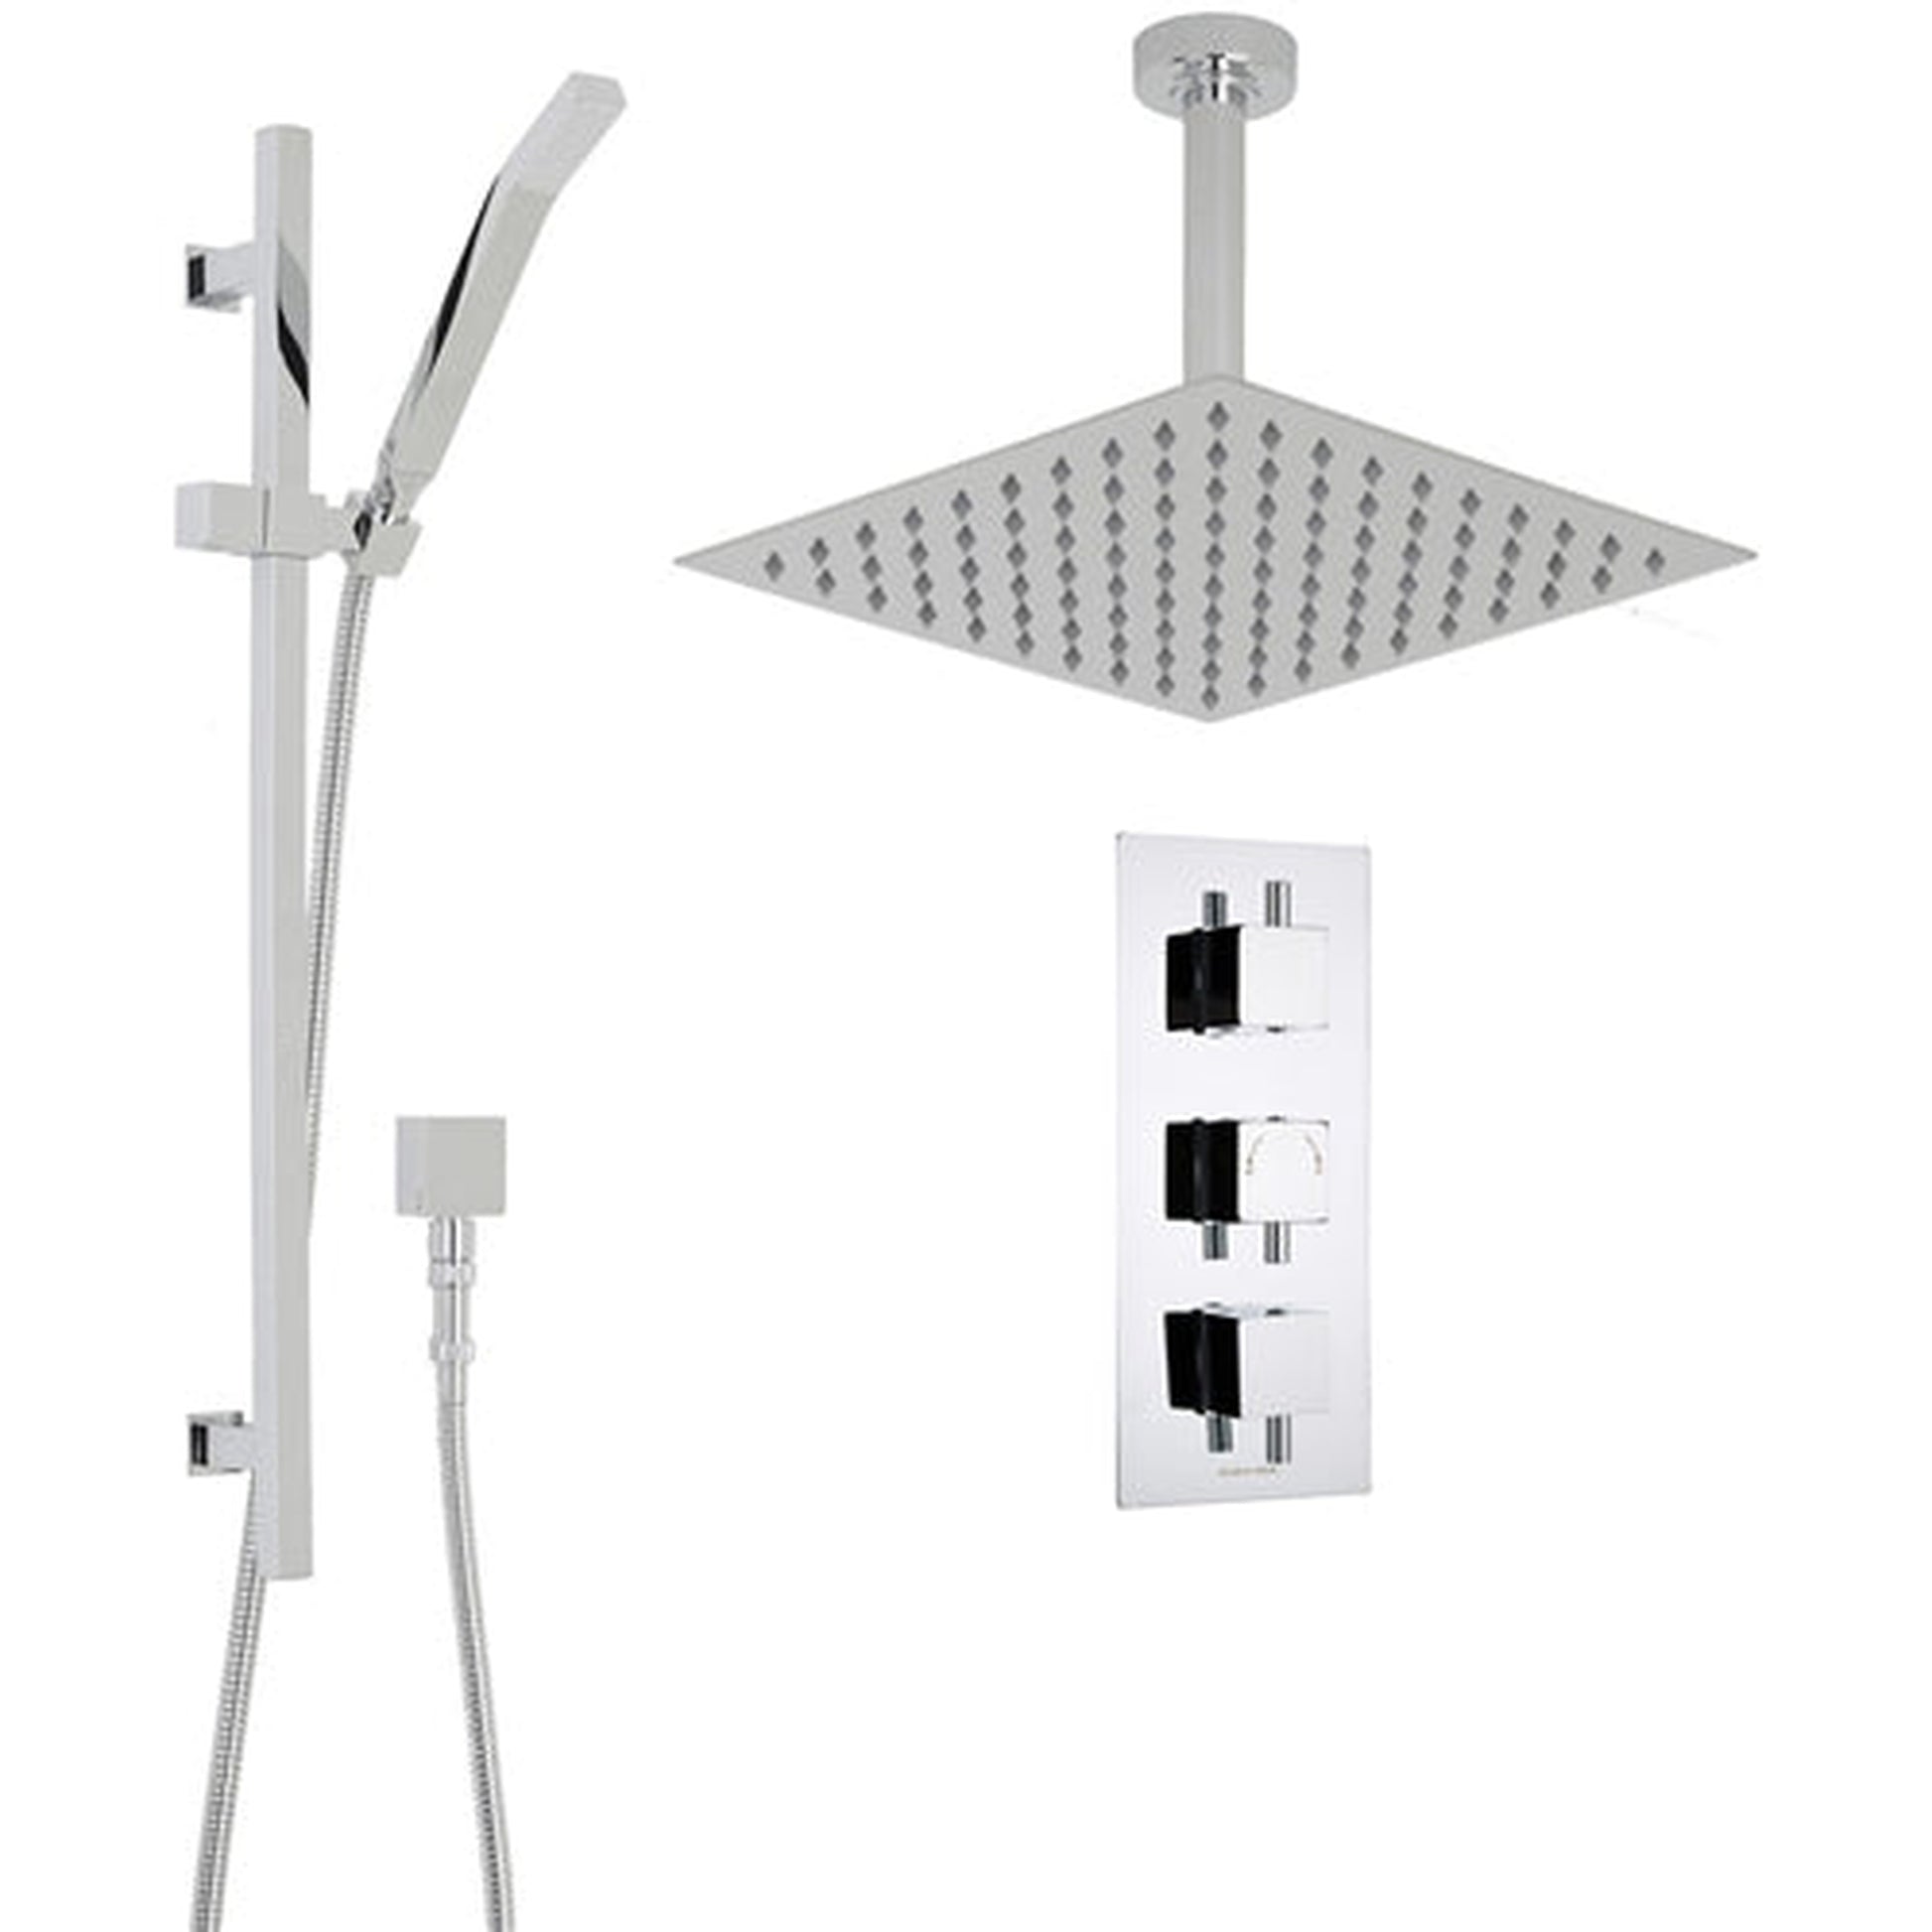 Fontana Liverpool 16" Chrome Square Ceiling Mounted Thermostatic Rainfall Shower System With Hand Shower and Without Water Powered LED Lights